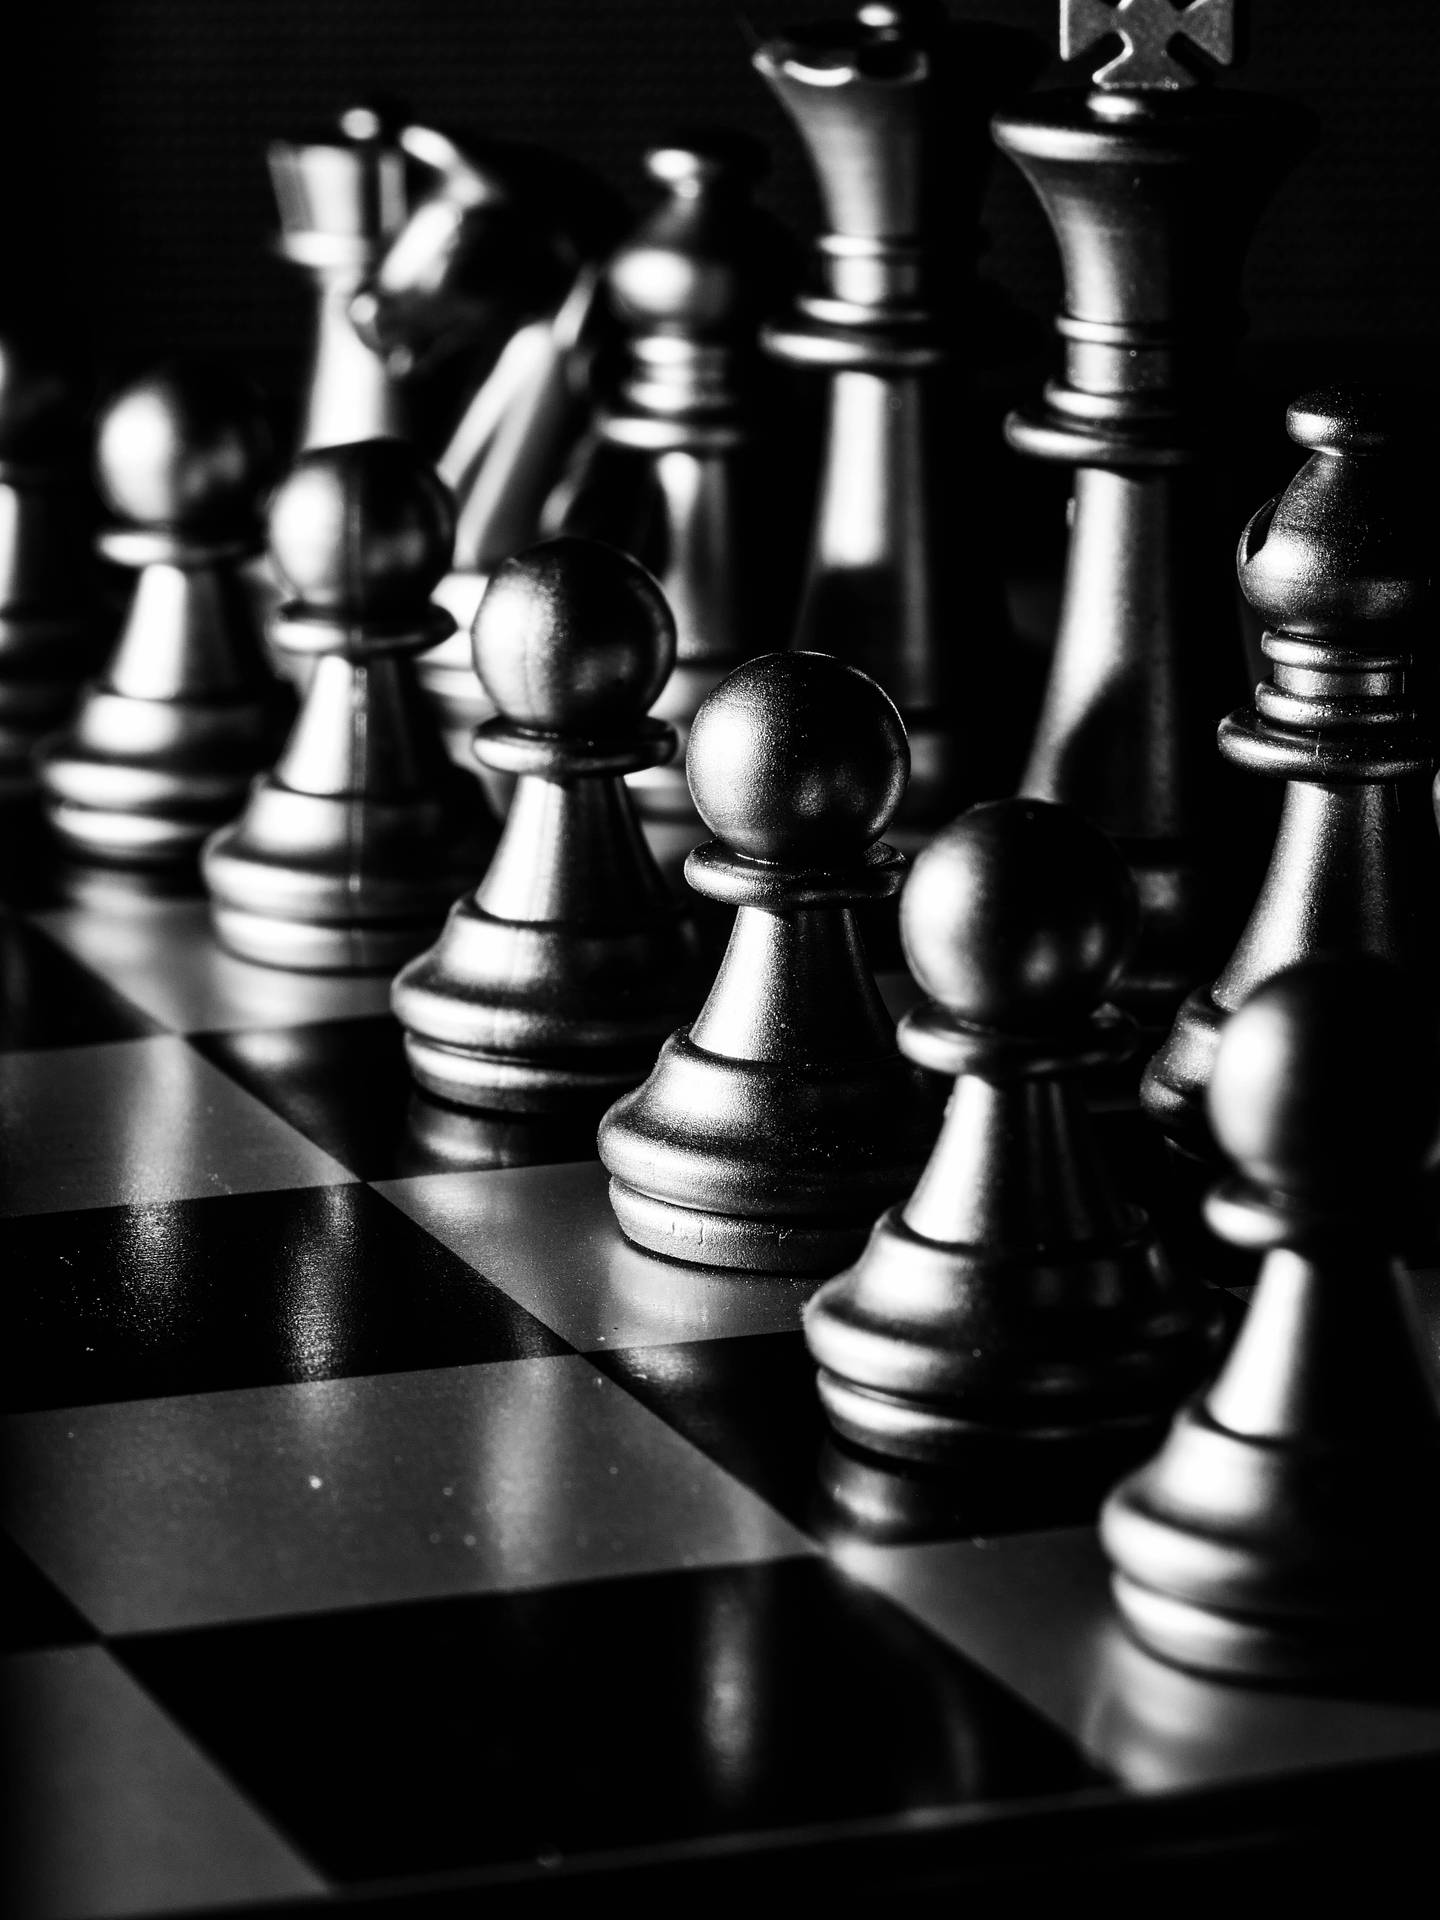 Cool Aesthetic Monochrome Chessboard Background